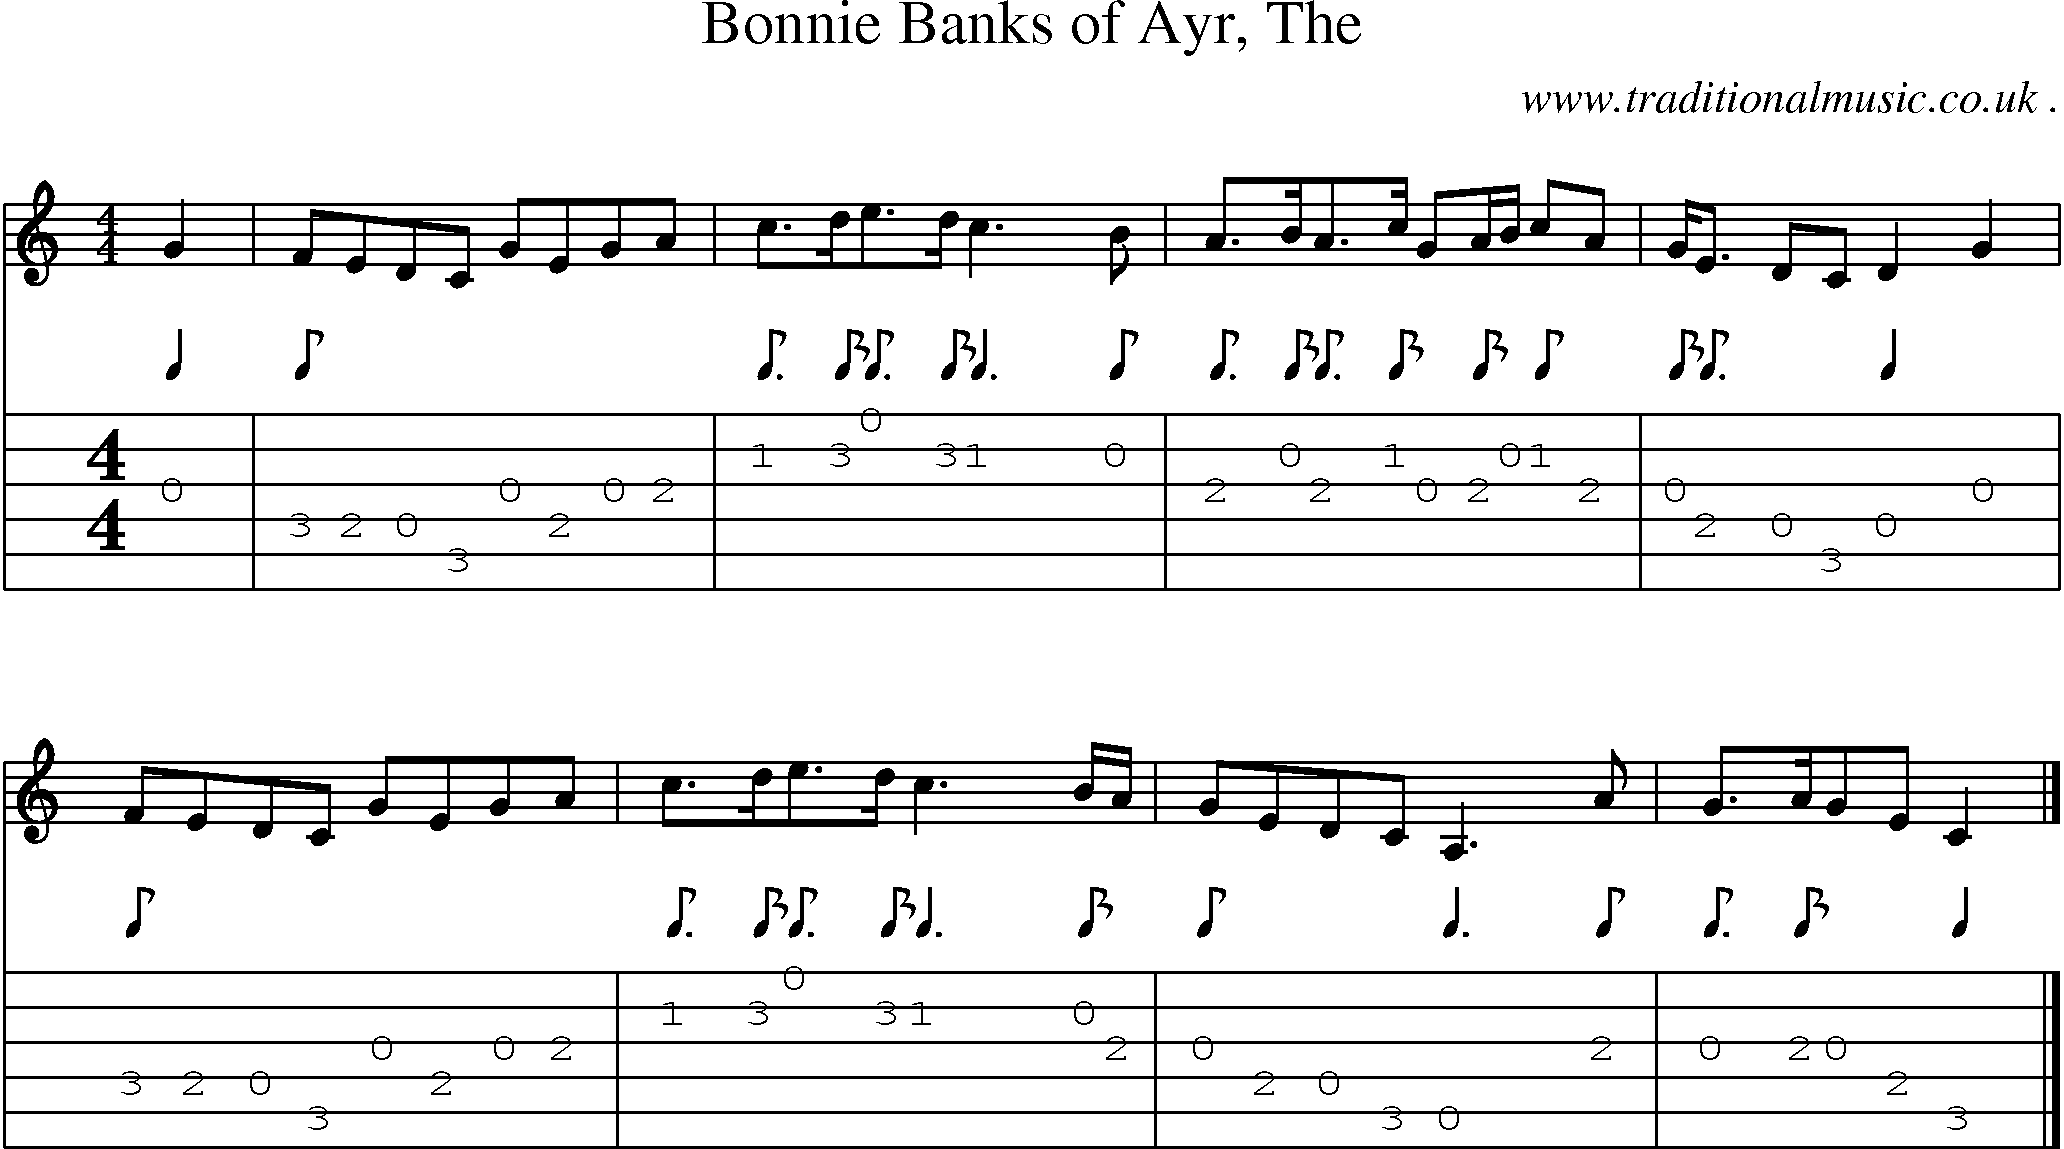 Sheet-music  score, Chords and Guitar Tabs for Bonnie Banks Of Ayr The